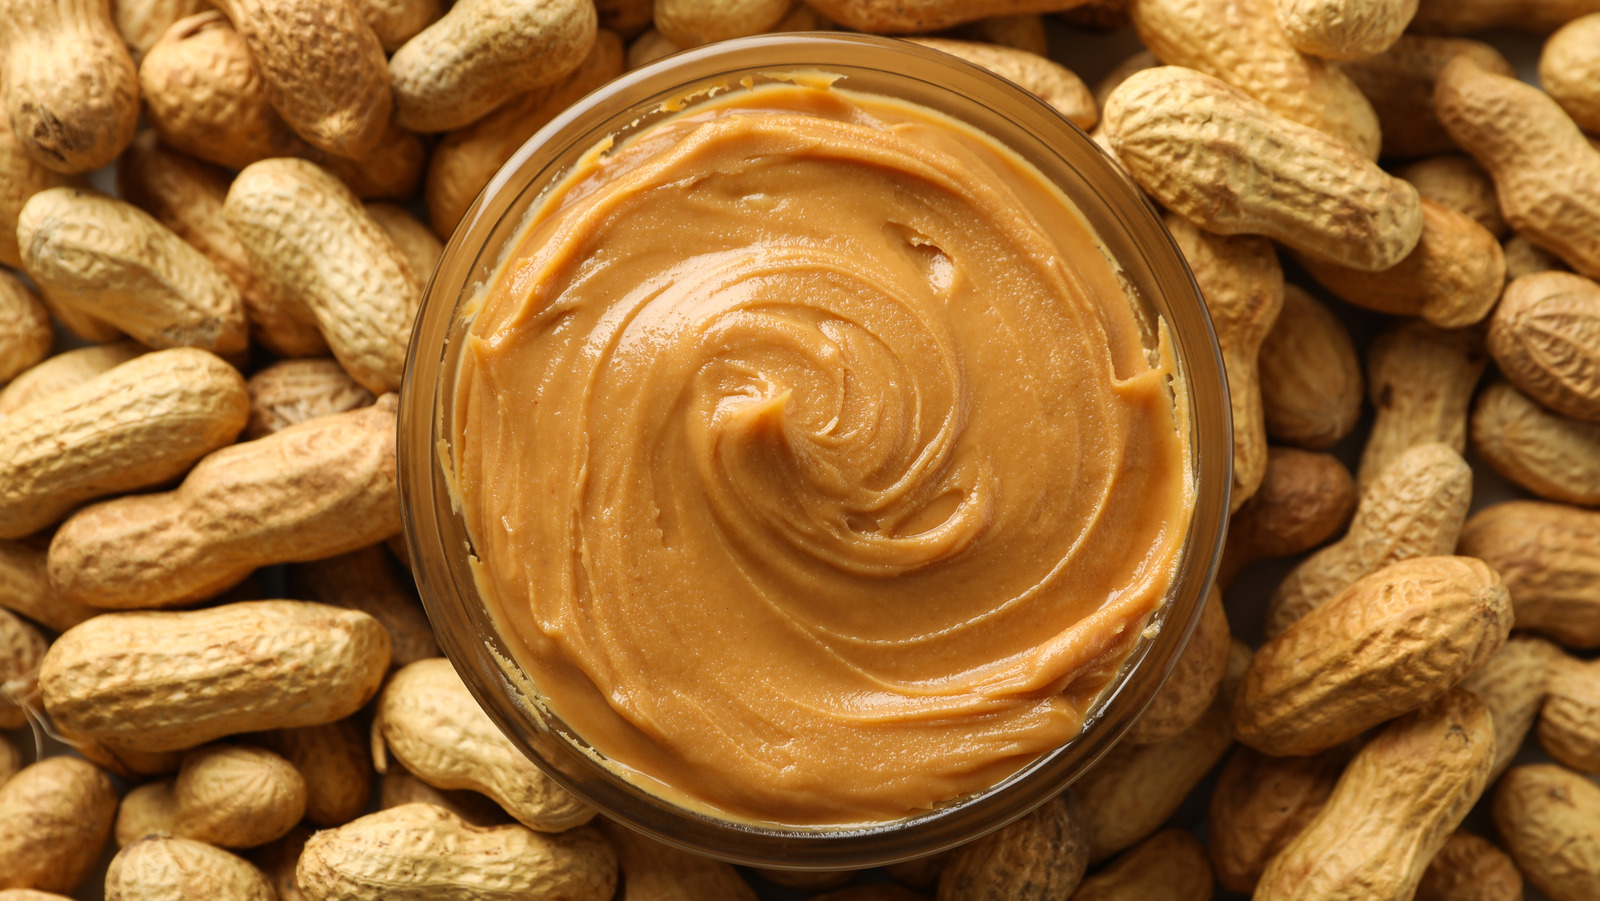 https://www.tastingtable.com/img/gallery/the-history-of-peanut-butter/l-intro-1686946533.jpg